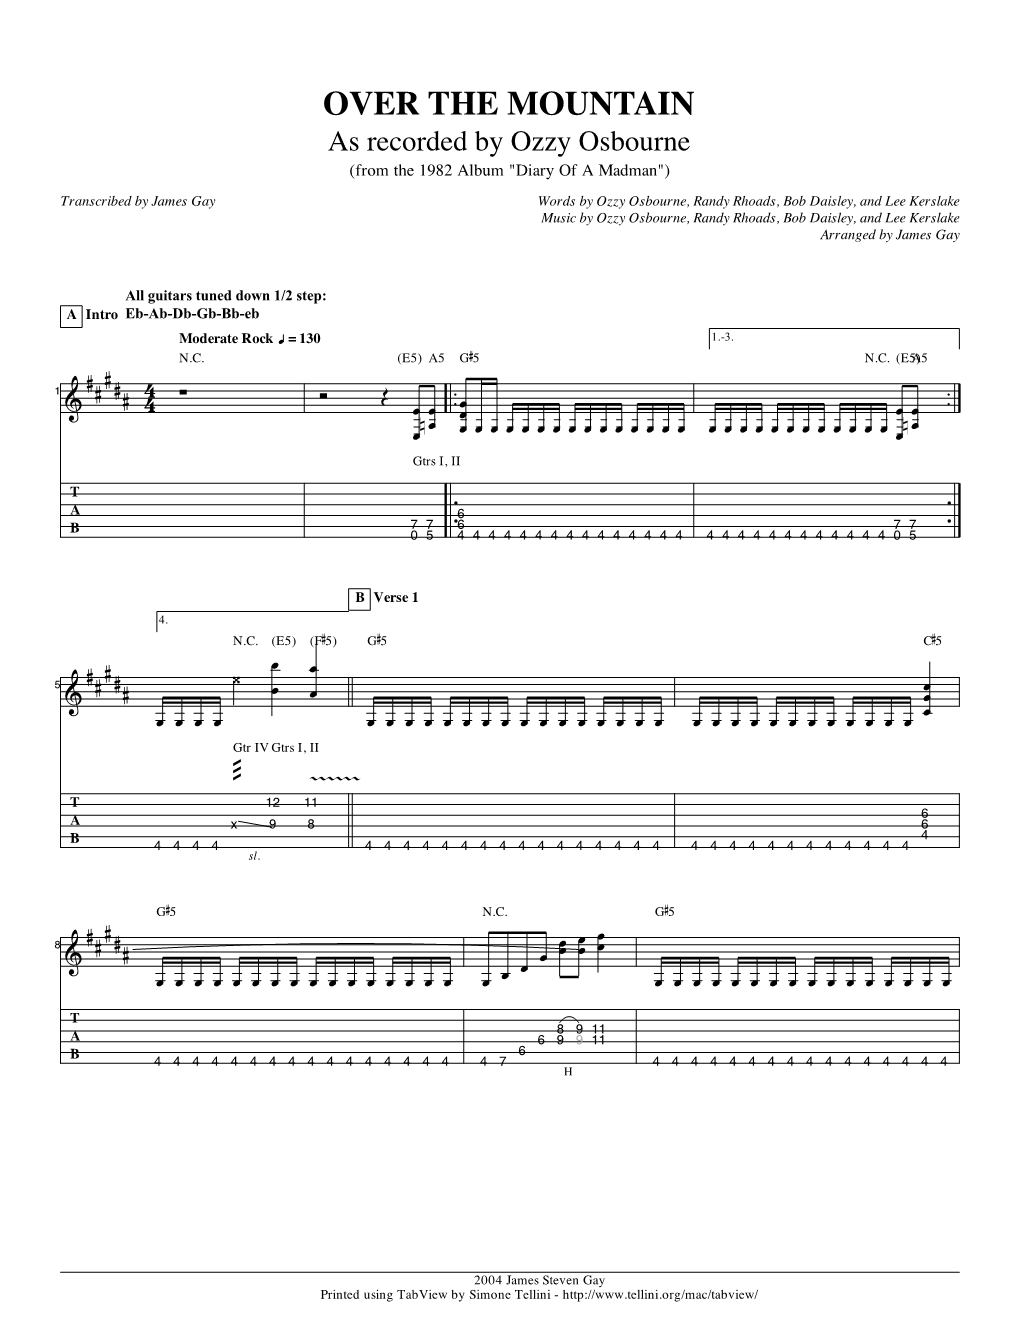 Over the Mountain Guitar Tab